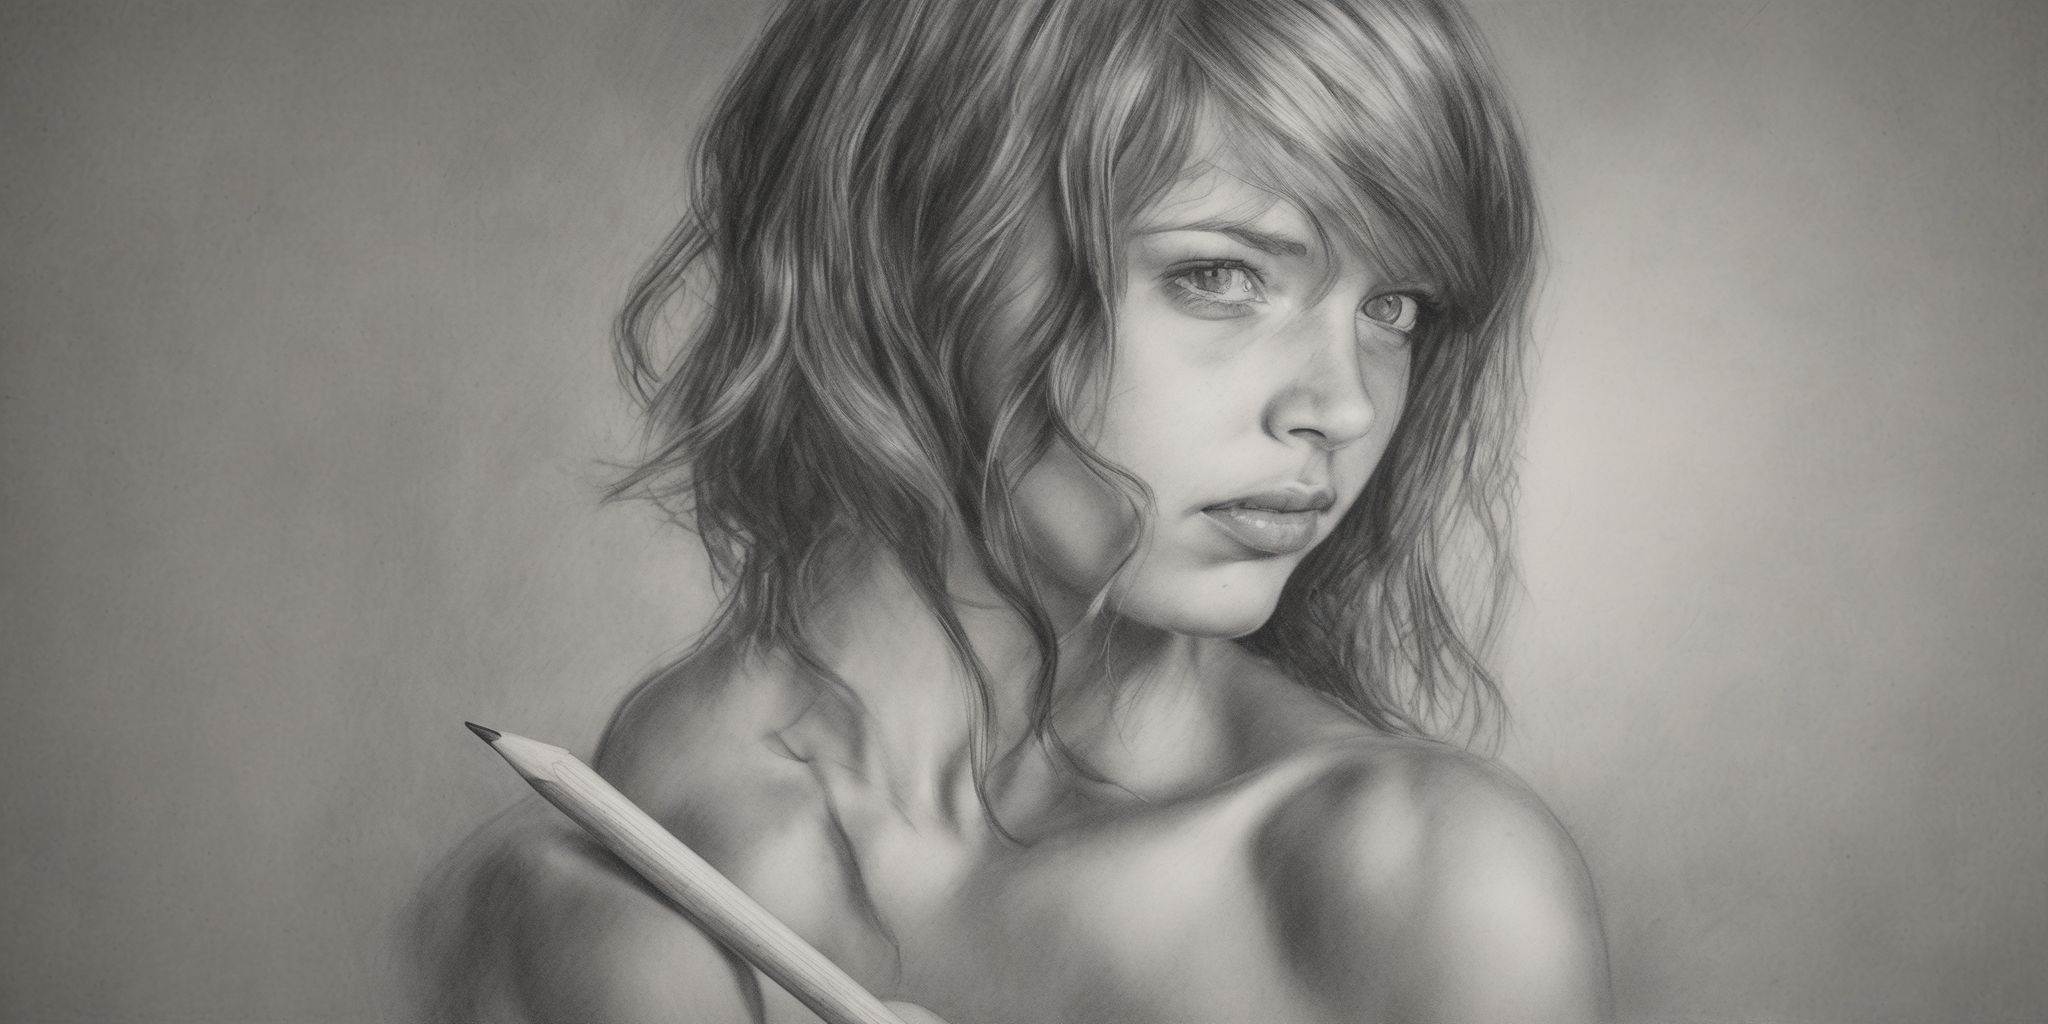 Pencil  in realistic, photographic style